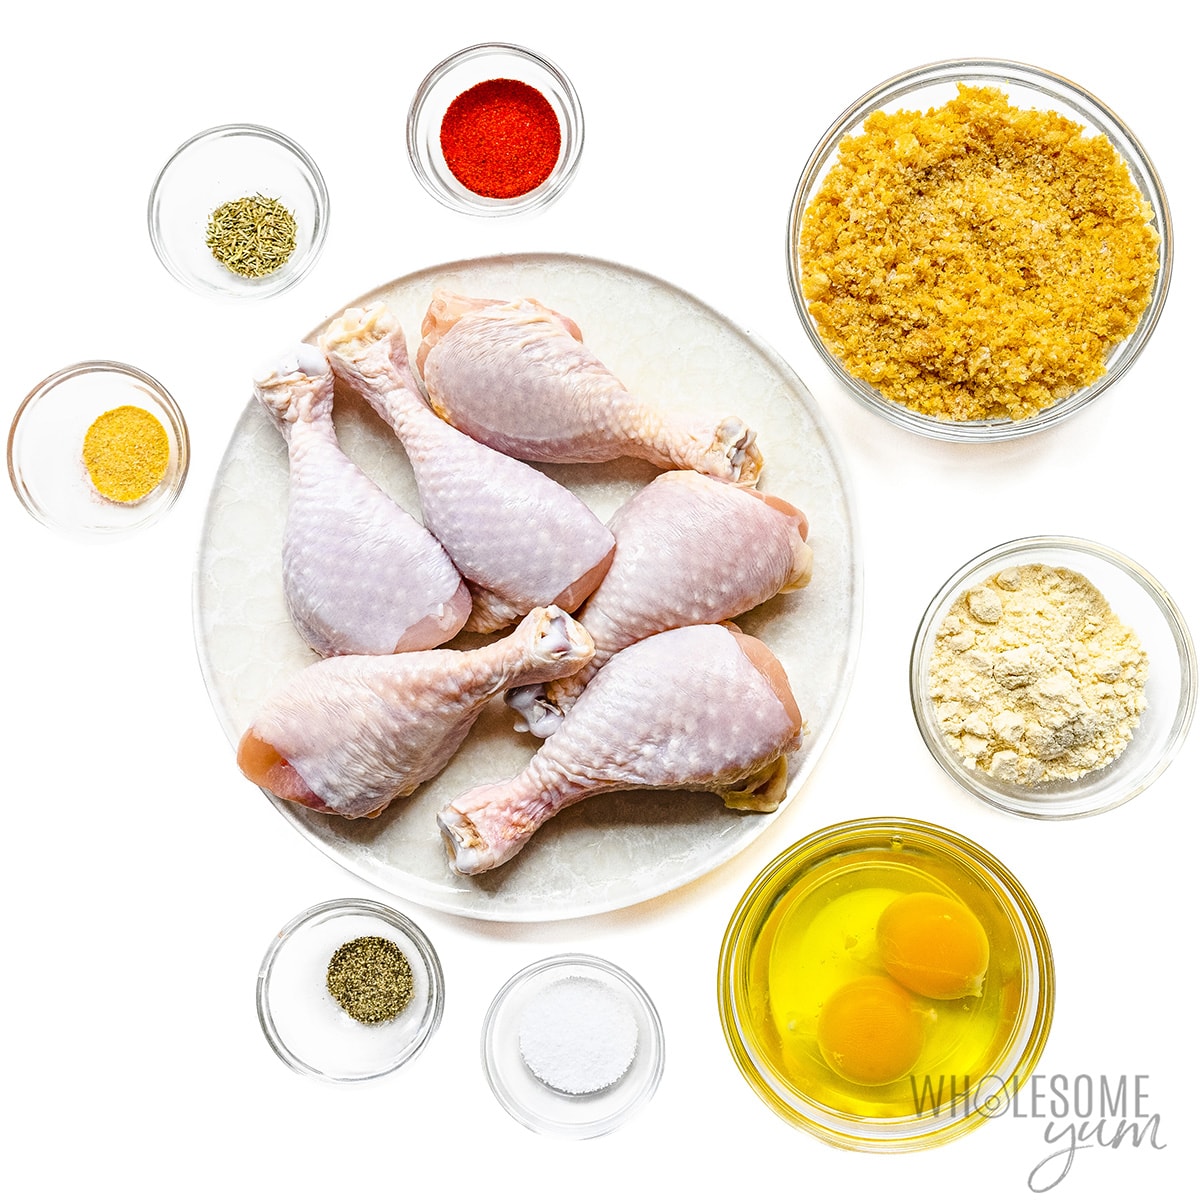 Ingredients for keto fried chicken.